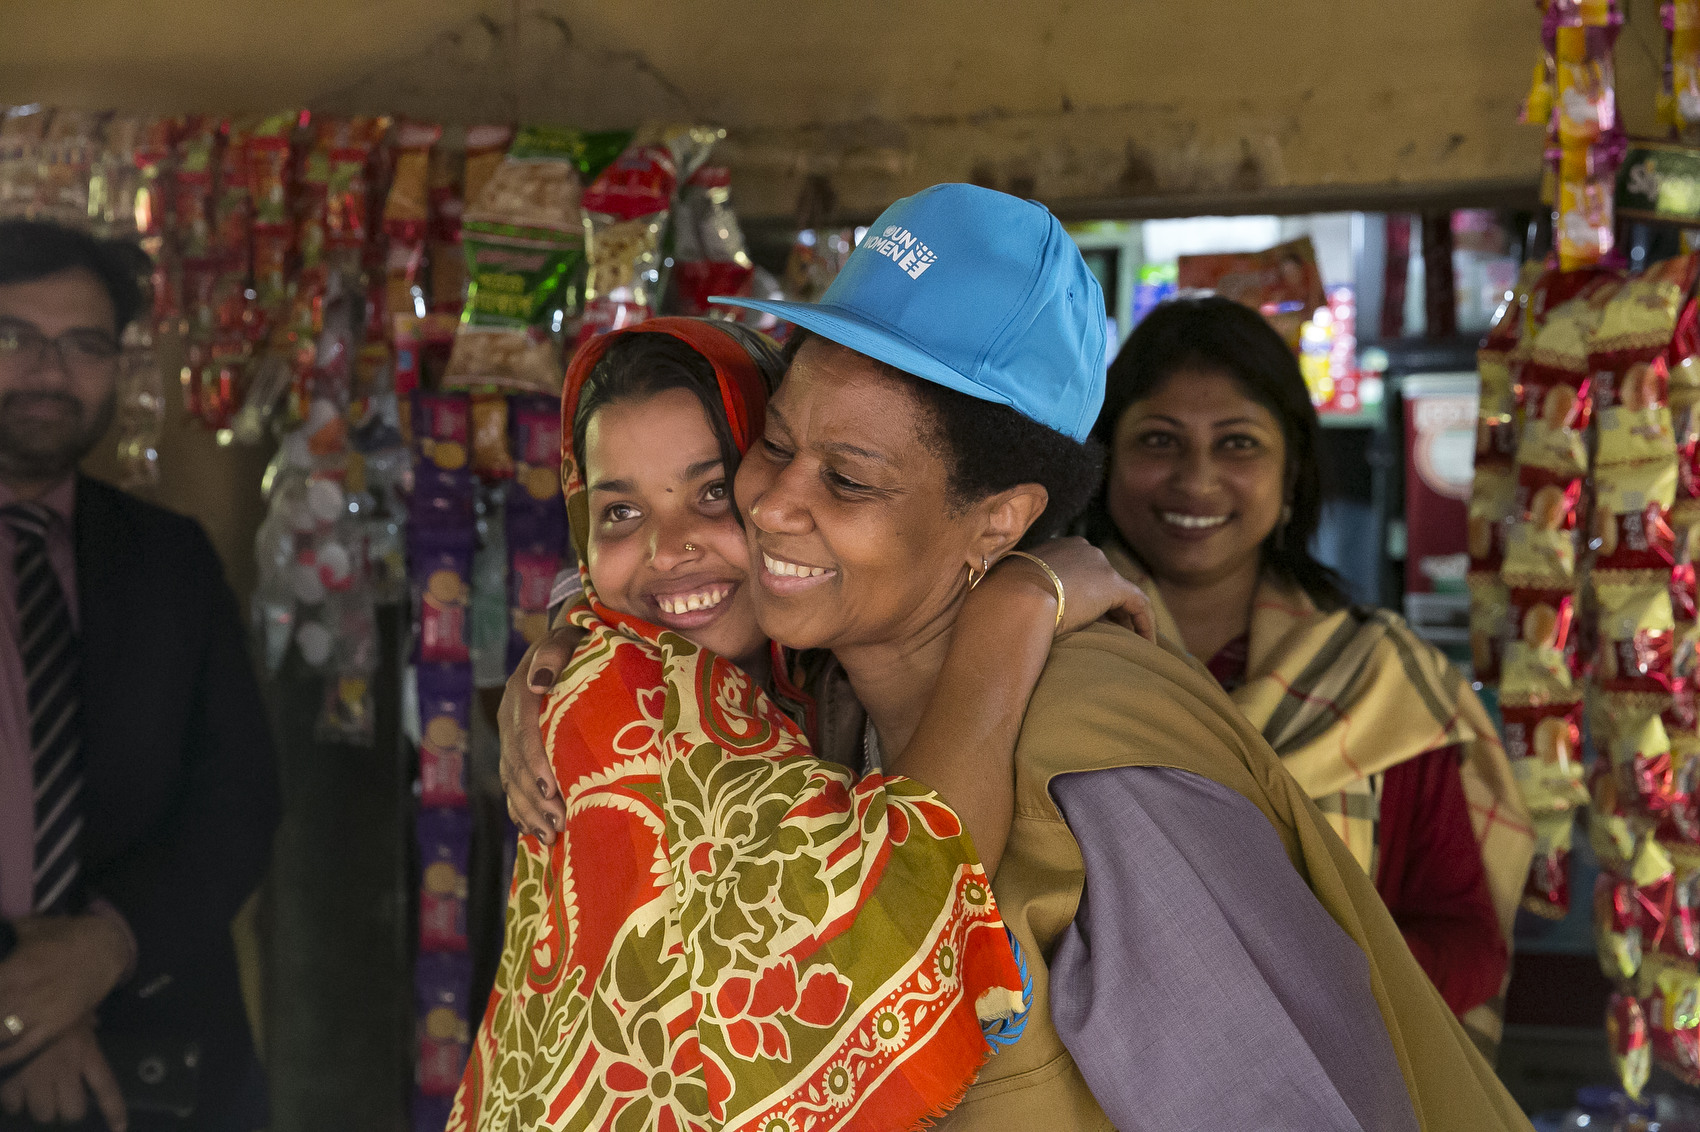 UN Women Executive Director, Phumzile Mlambo-Ngcuka meets with Deloara and her family at her shop in Ukhiya  January 31, 2018 in Chittagong district, Bangladesh. UN Women/Allison Joyce